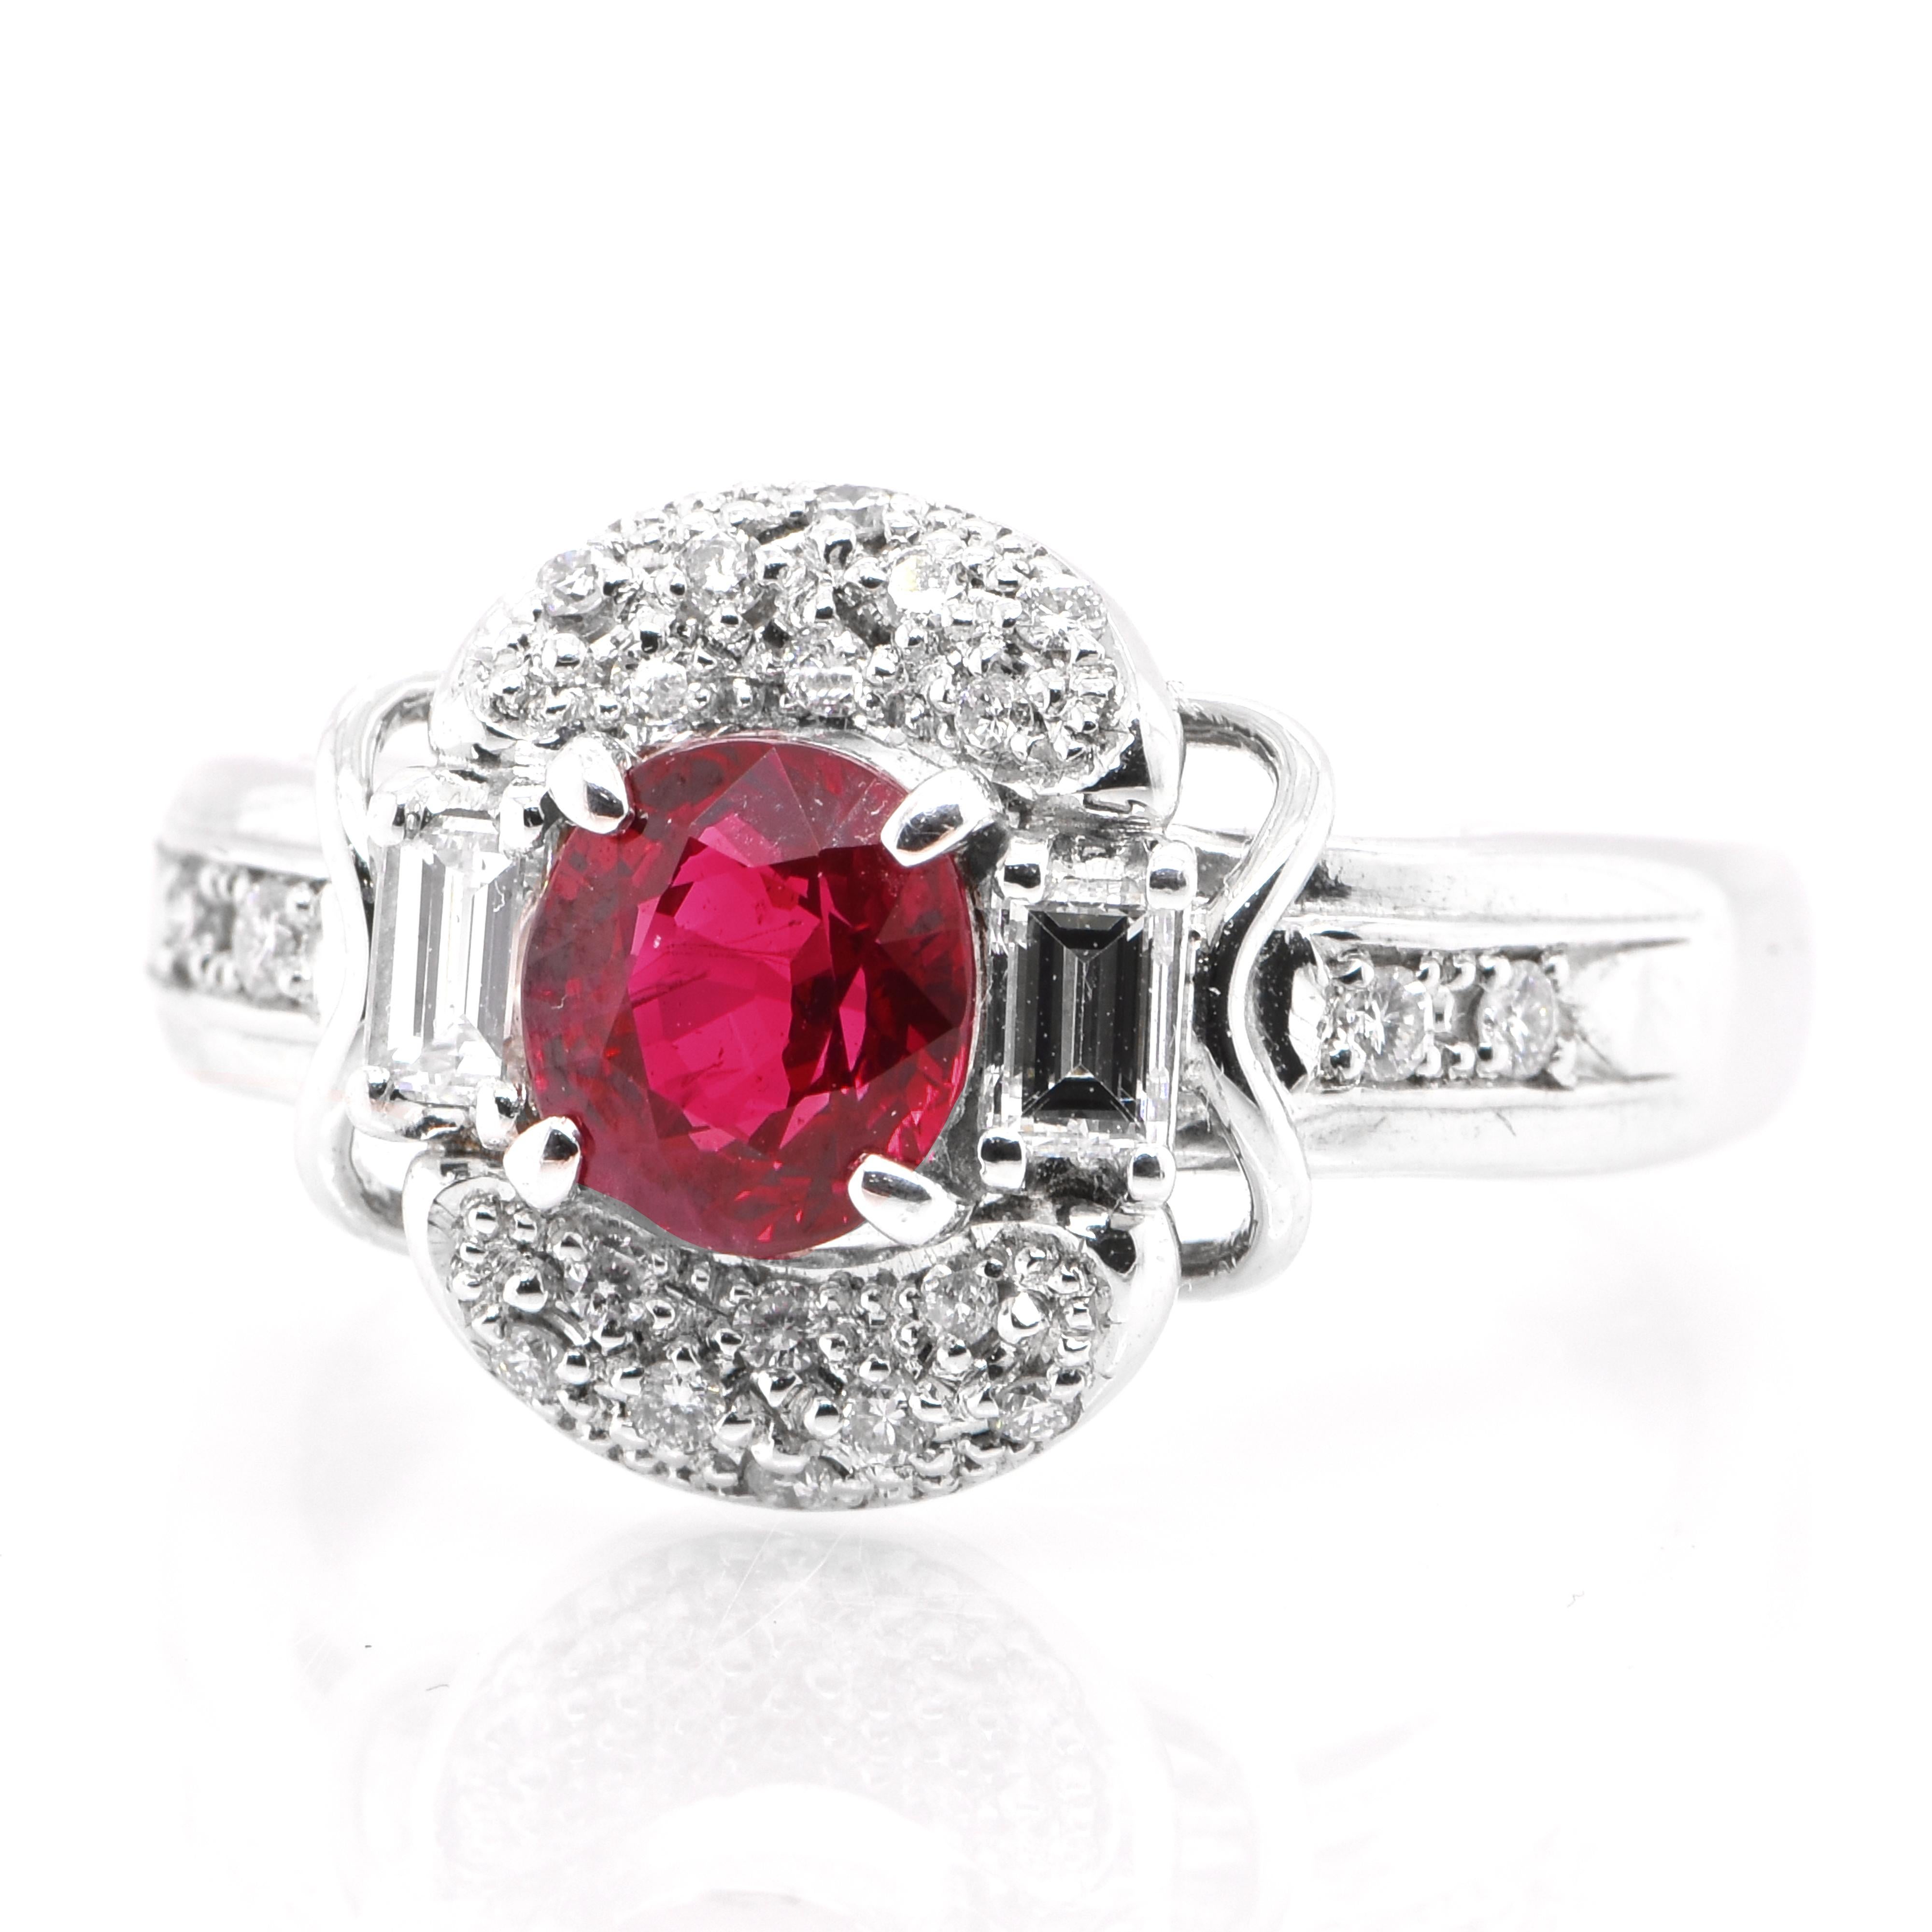 A beautiful Engagement Ring featuring a 1.19 Carat, Natural, Vivid-Red Ruby and 0.40 Carats Diamond Accents set in Platinum. The Ruby displays really exceptional luster and color. Rubies are referred to as 